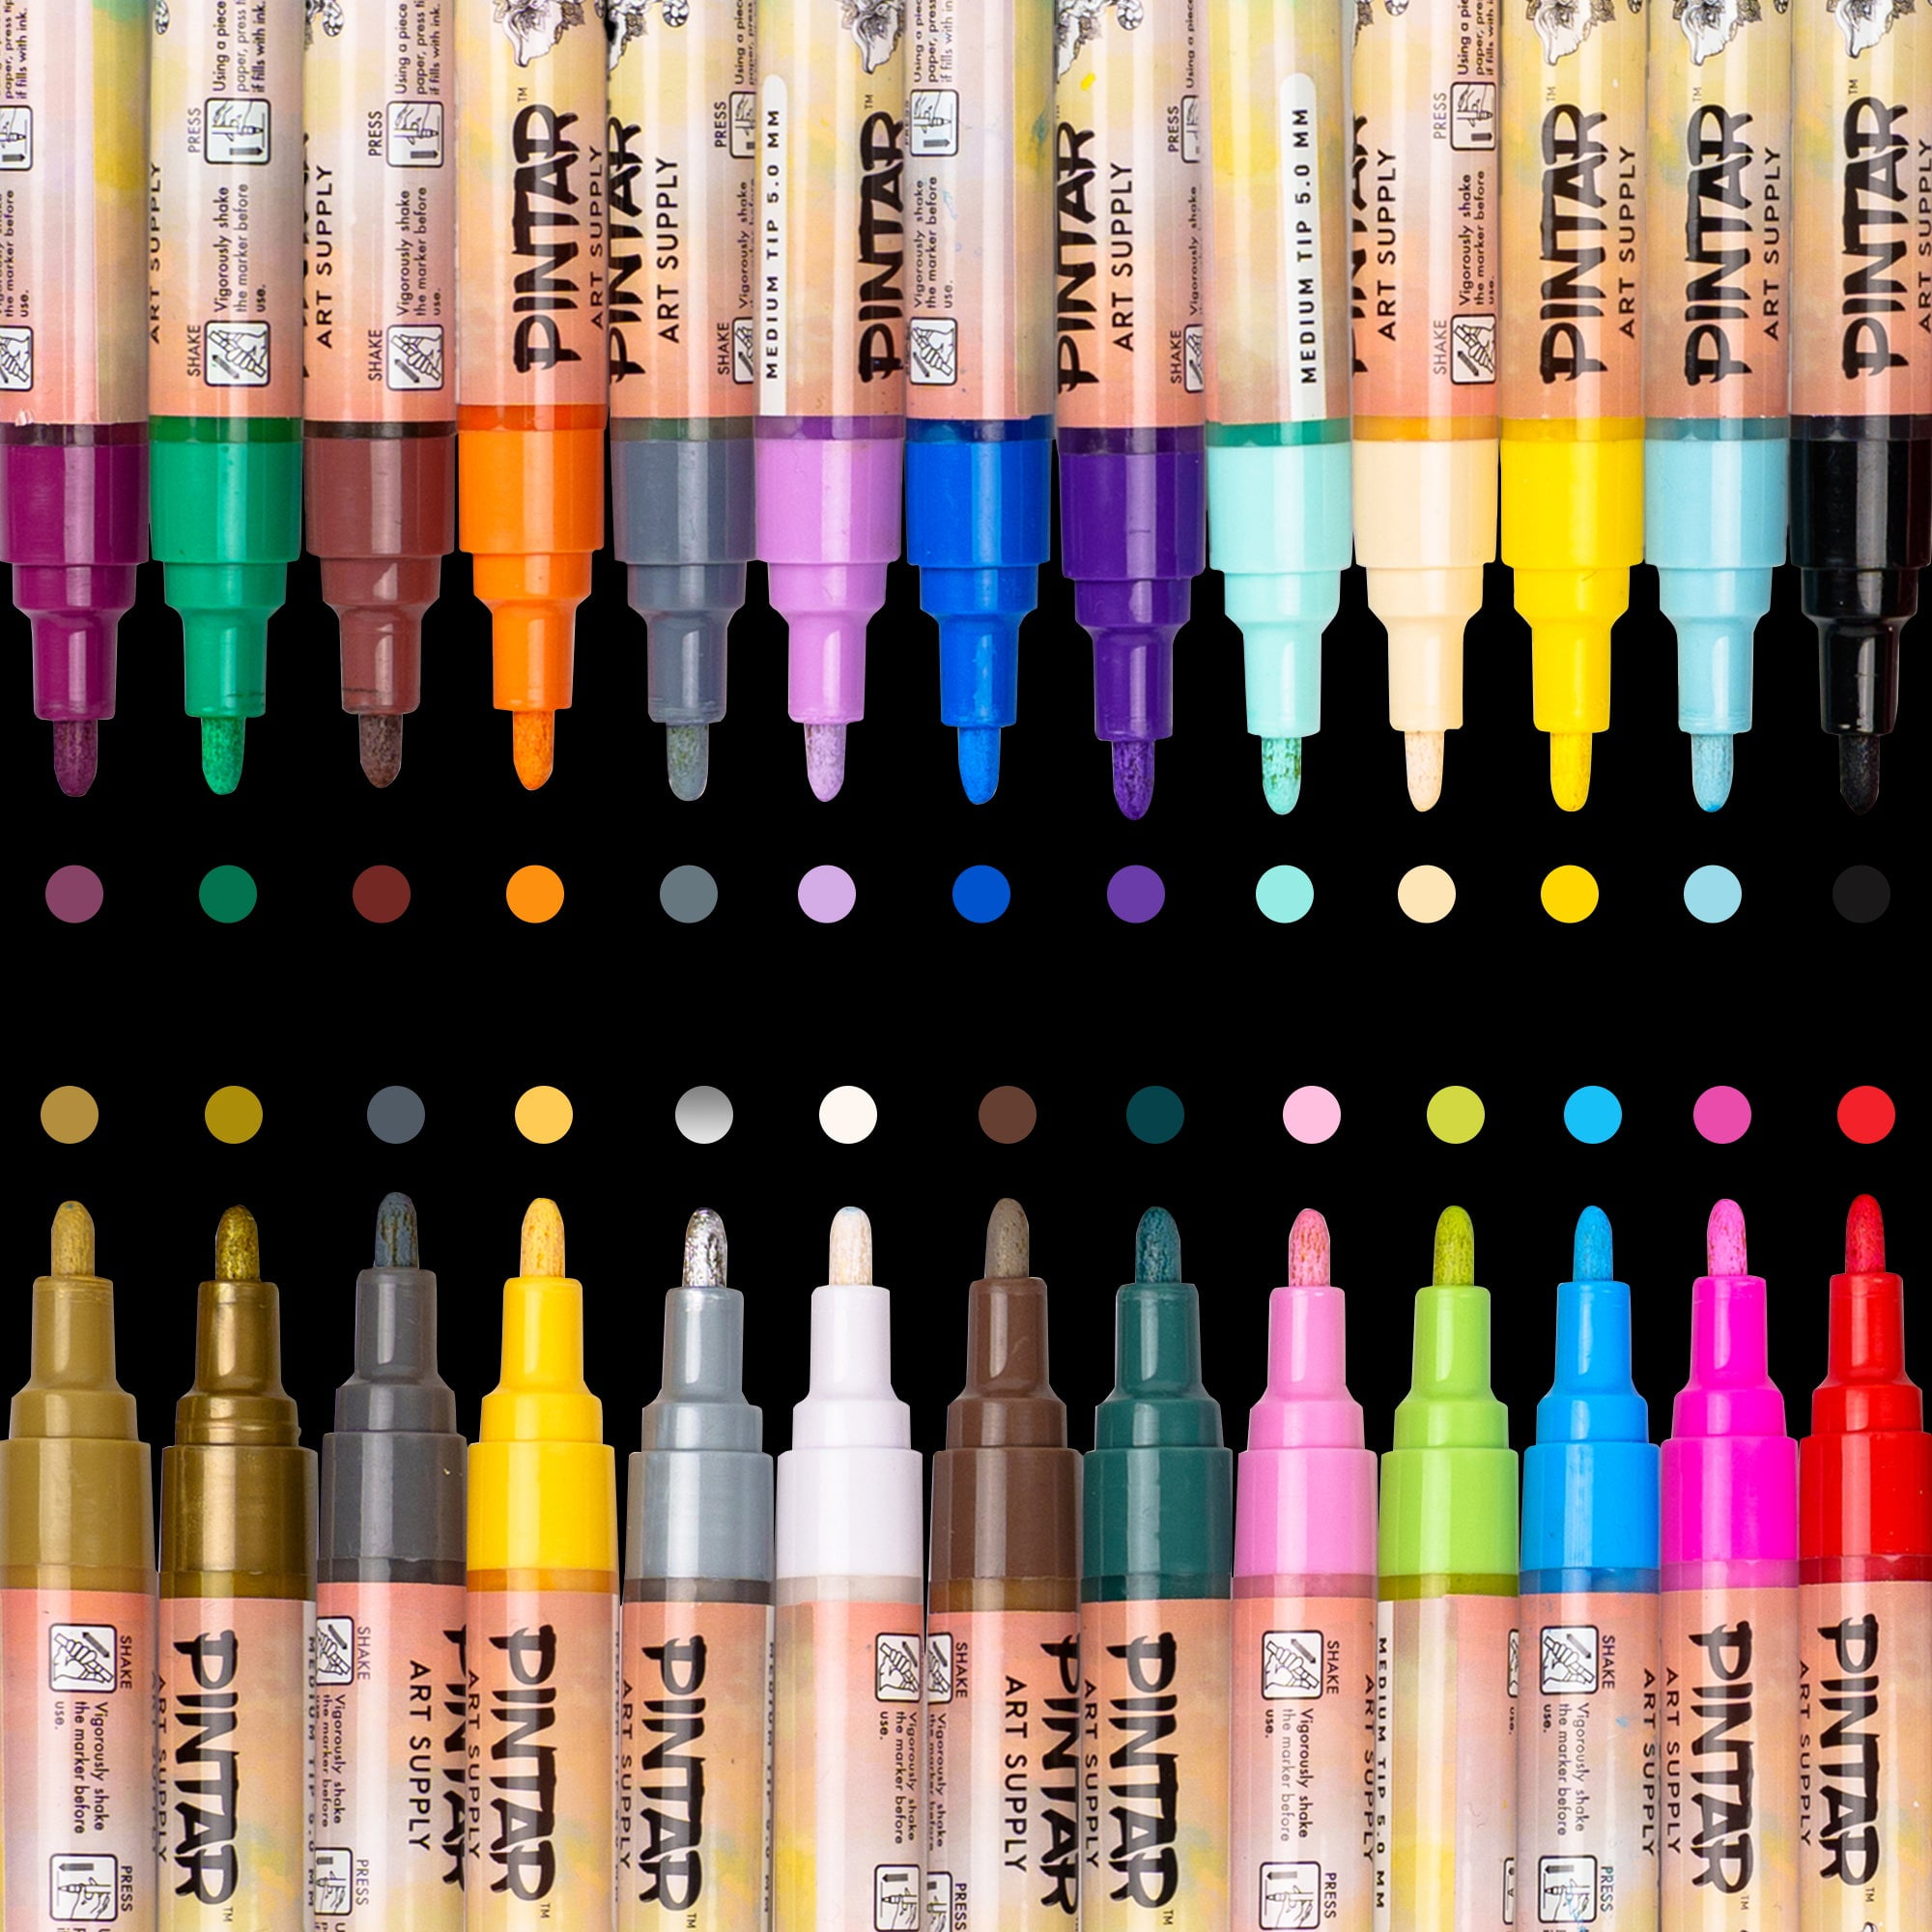 Acrylic Paint Pens 0.7 mm EXTRA-FINE Tip: 5-Pack, Your Choice of